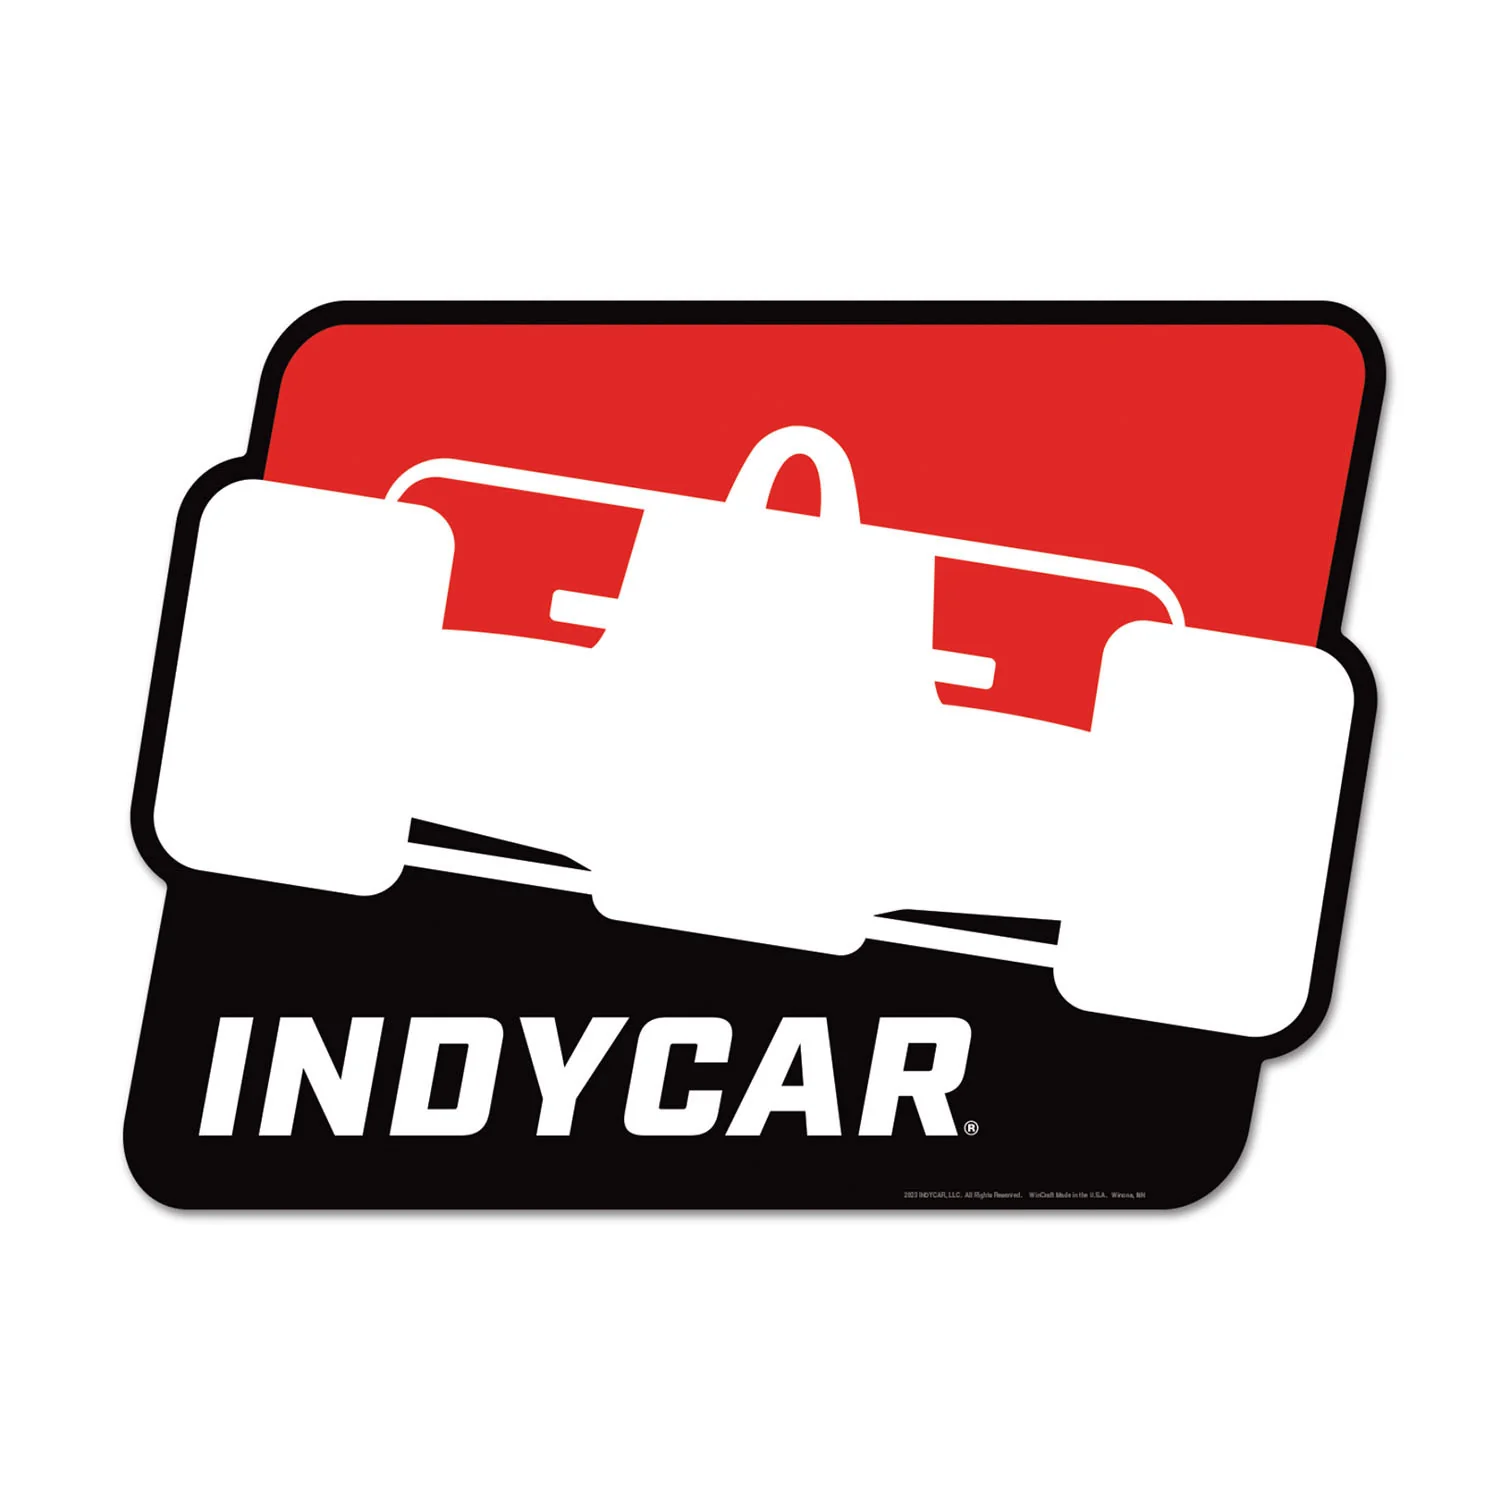 The Official Site of the NTT INDYCAR SERIES INDYCAR